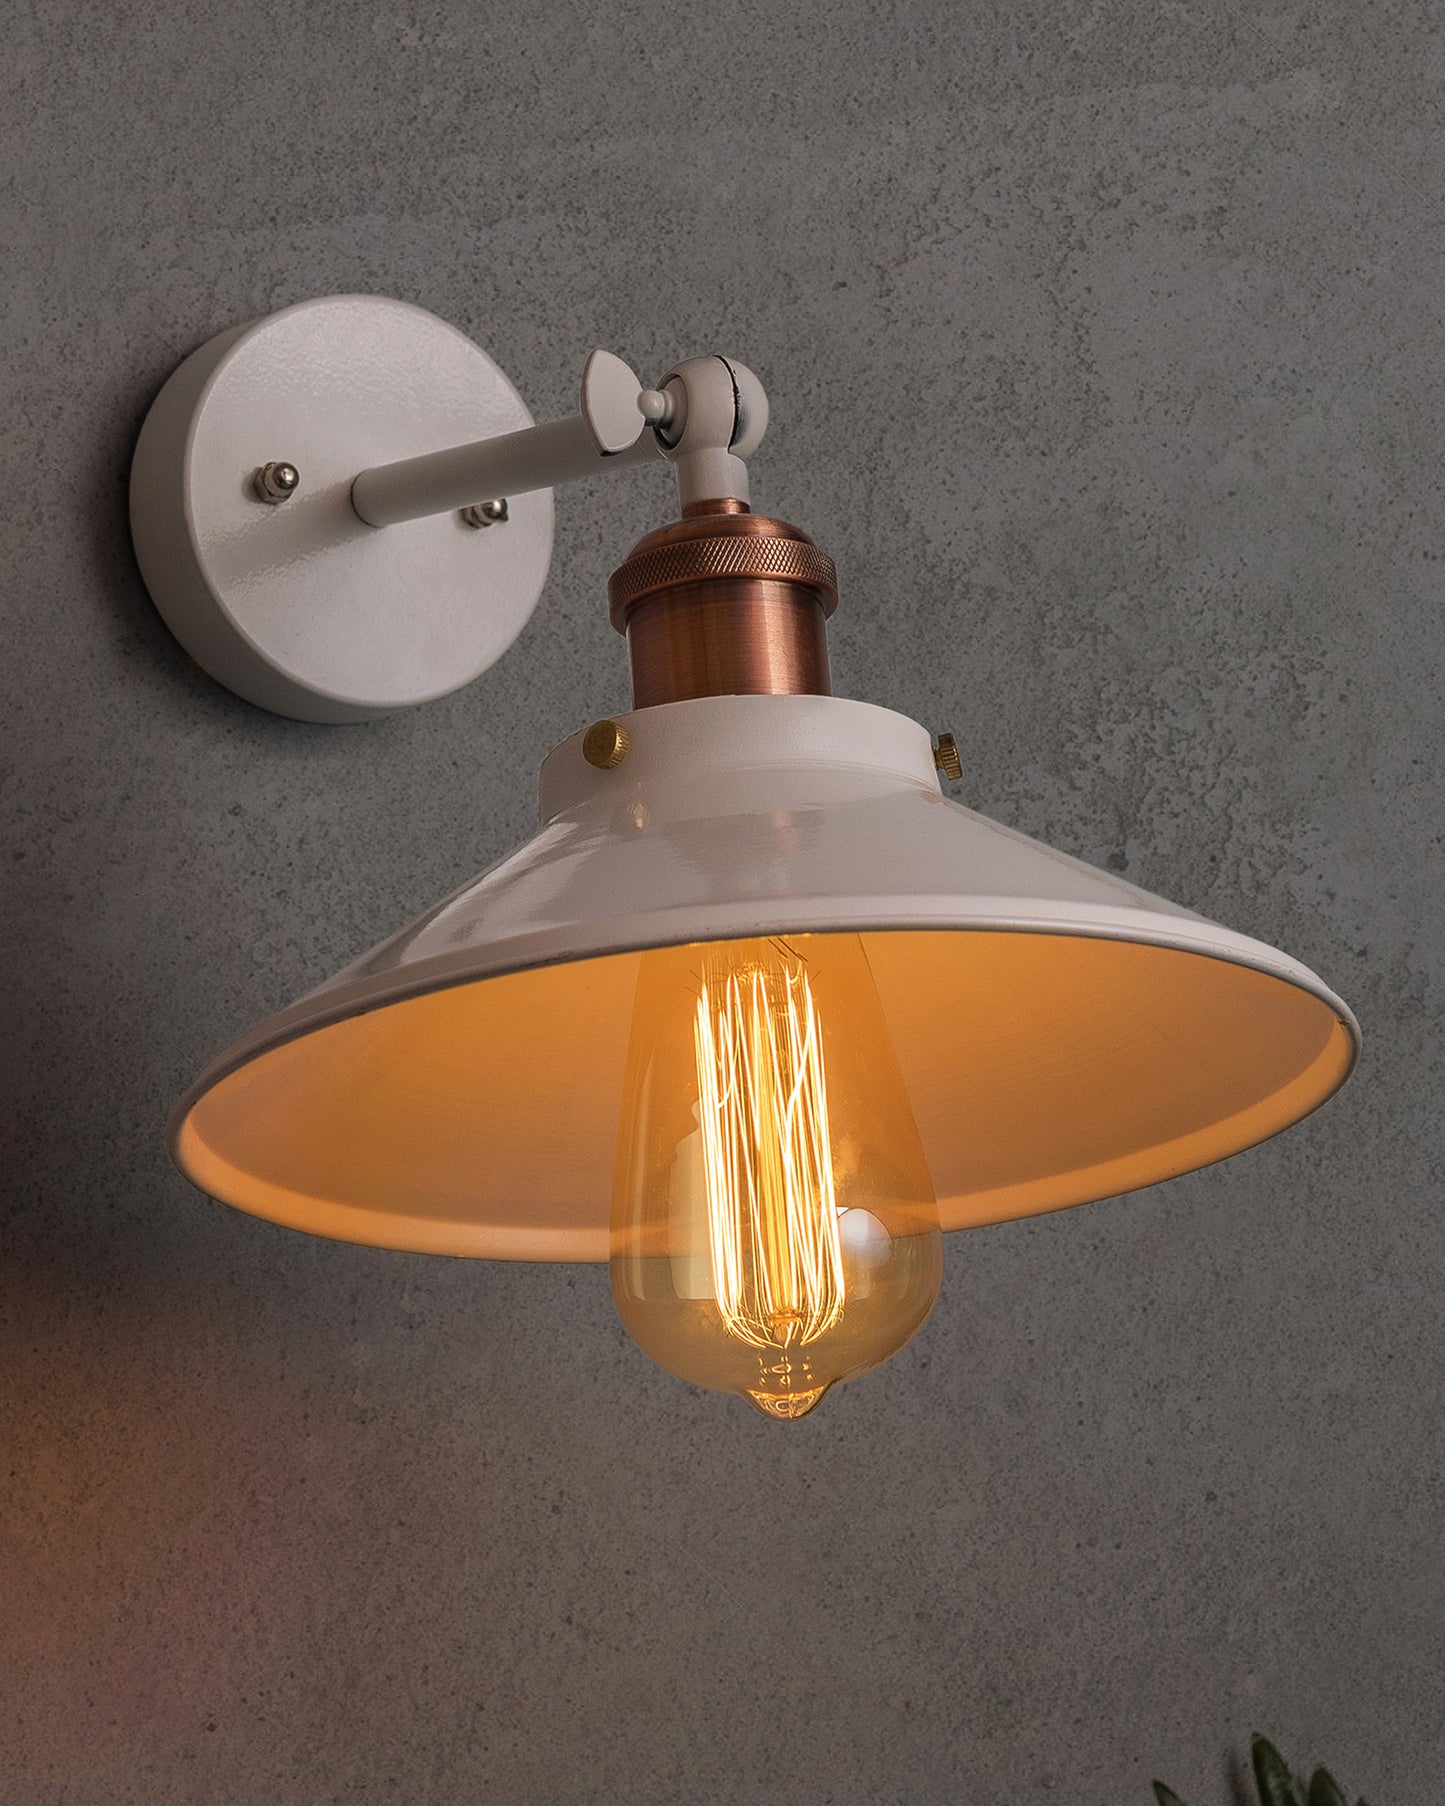 Edison White Cone Shade Wall Lamp, Antique Gold Vintage Industrial Loft, E27 Holder, Decorative, Swing Wall Light